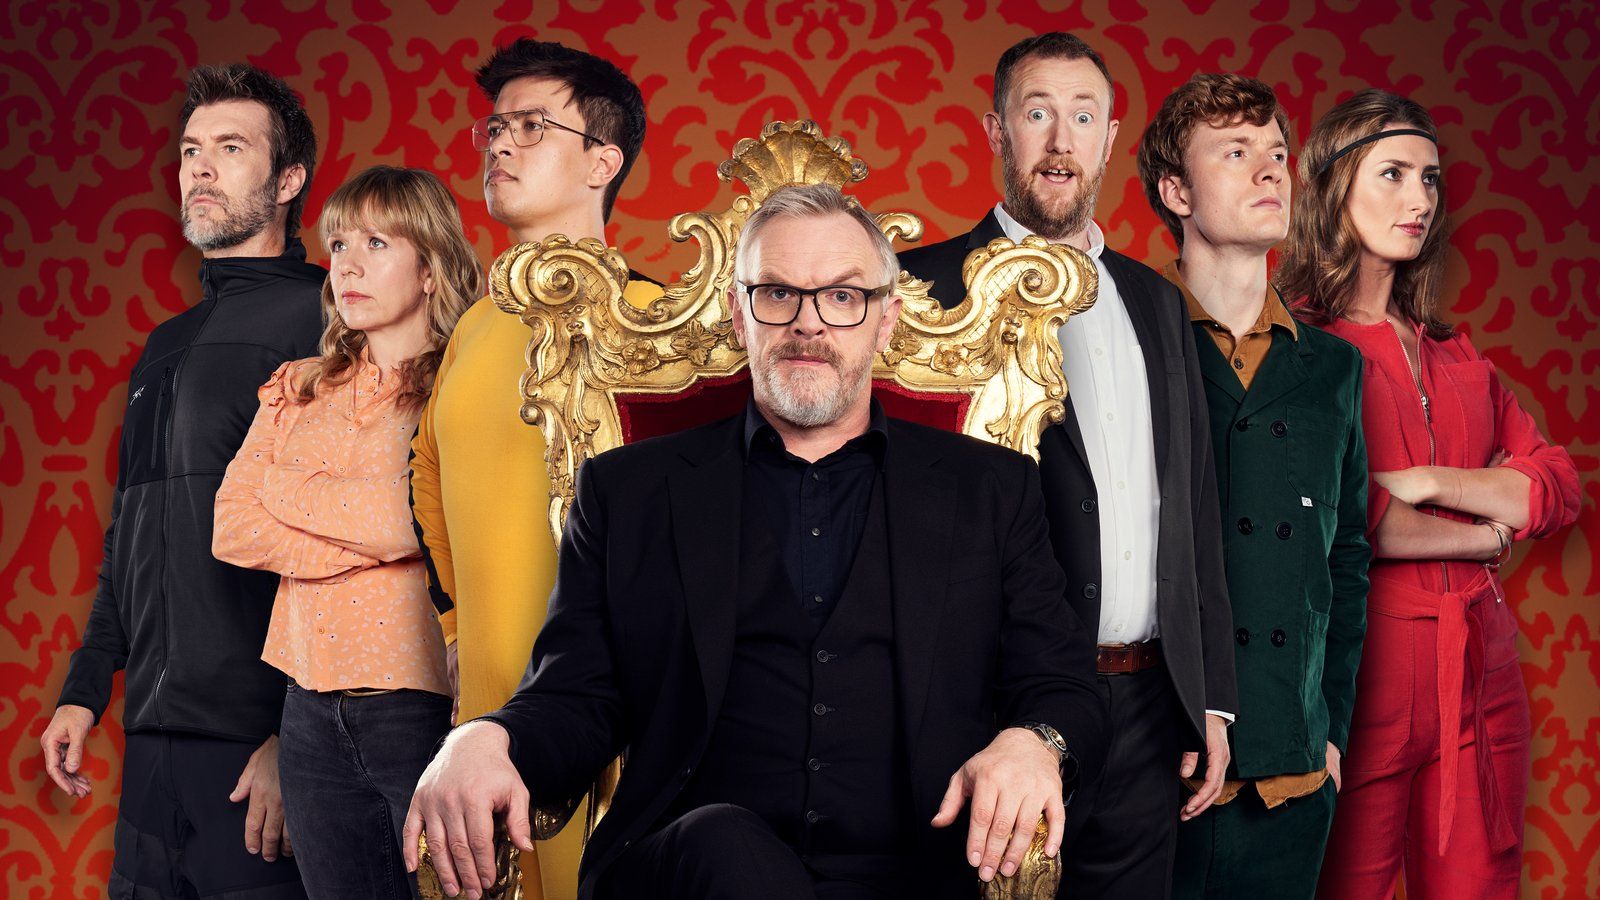 Greg Davies as host of Taskmaster with contestants in promo photo